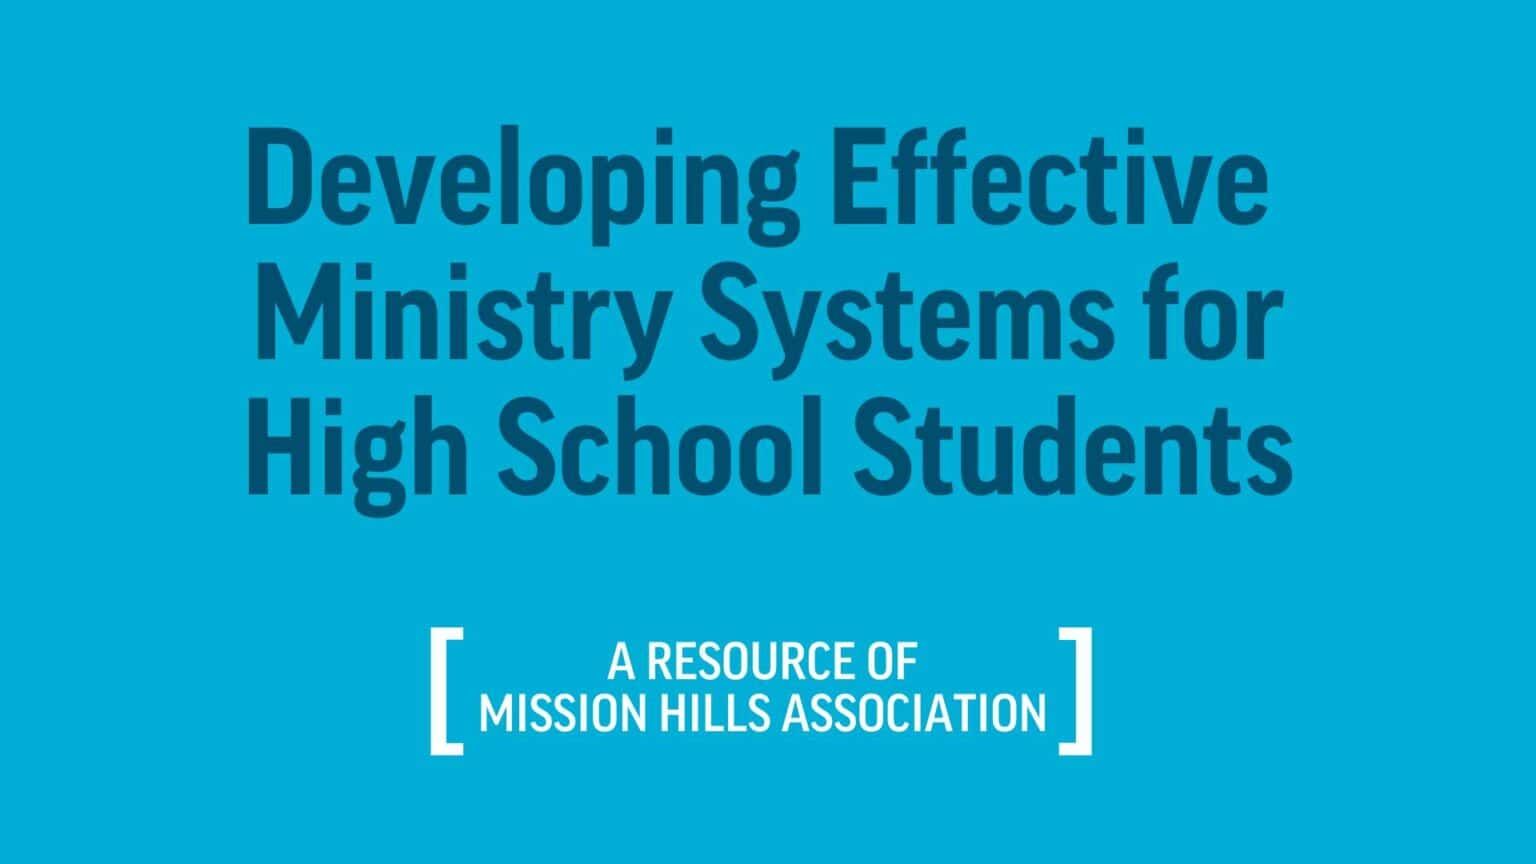 Developing Effective Ministry Systems for High School Students